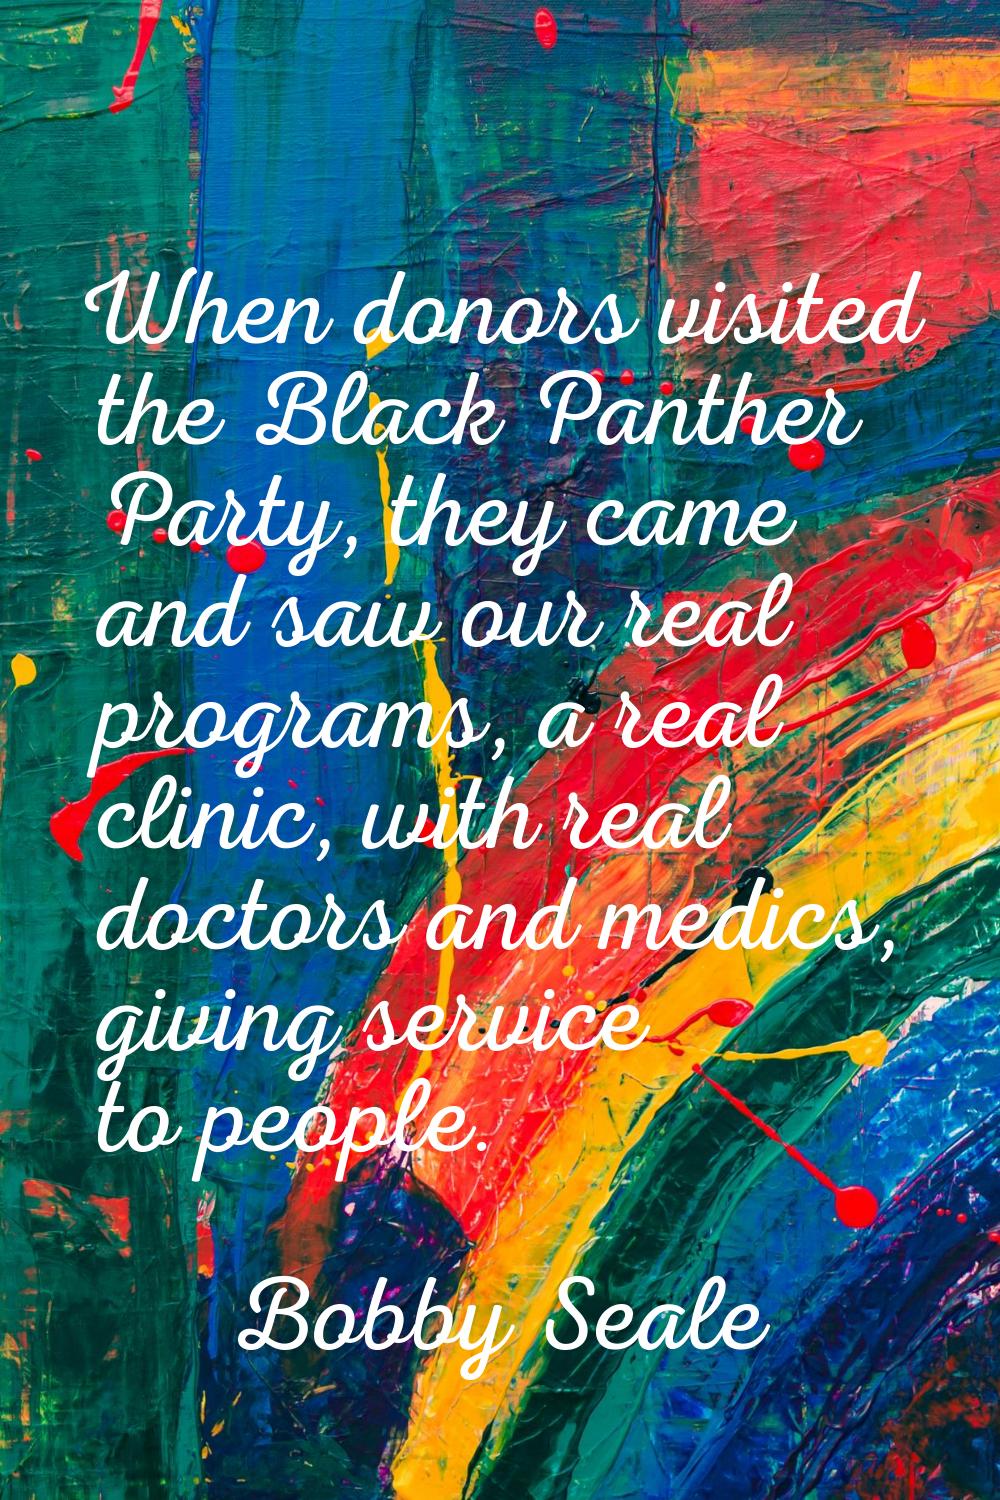 When donors visited the Black Panther Party, they came and saw our real programs, a real clinic, wi